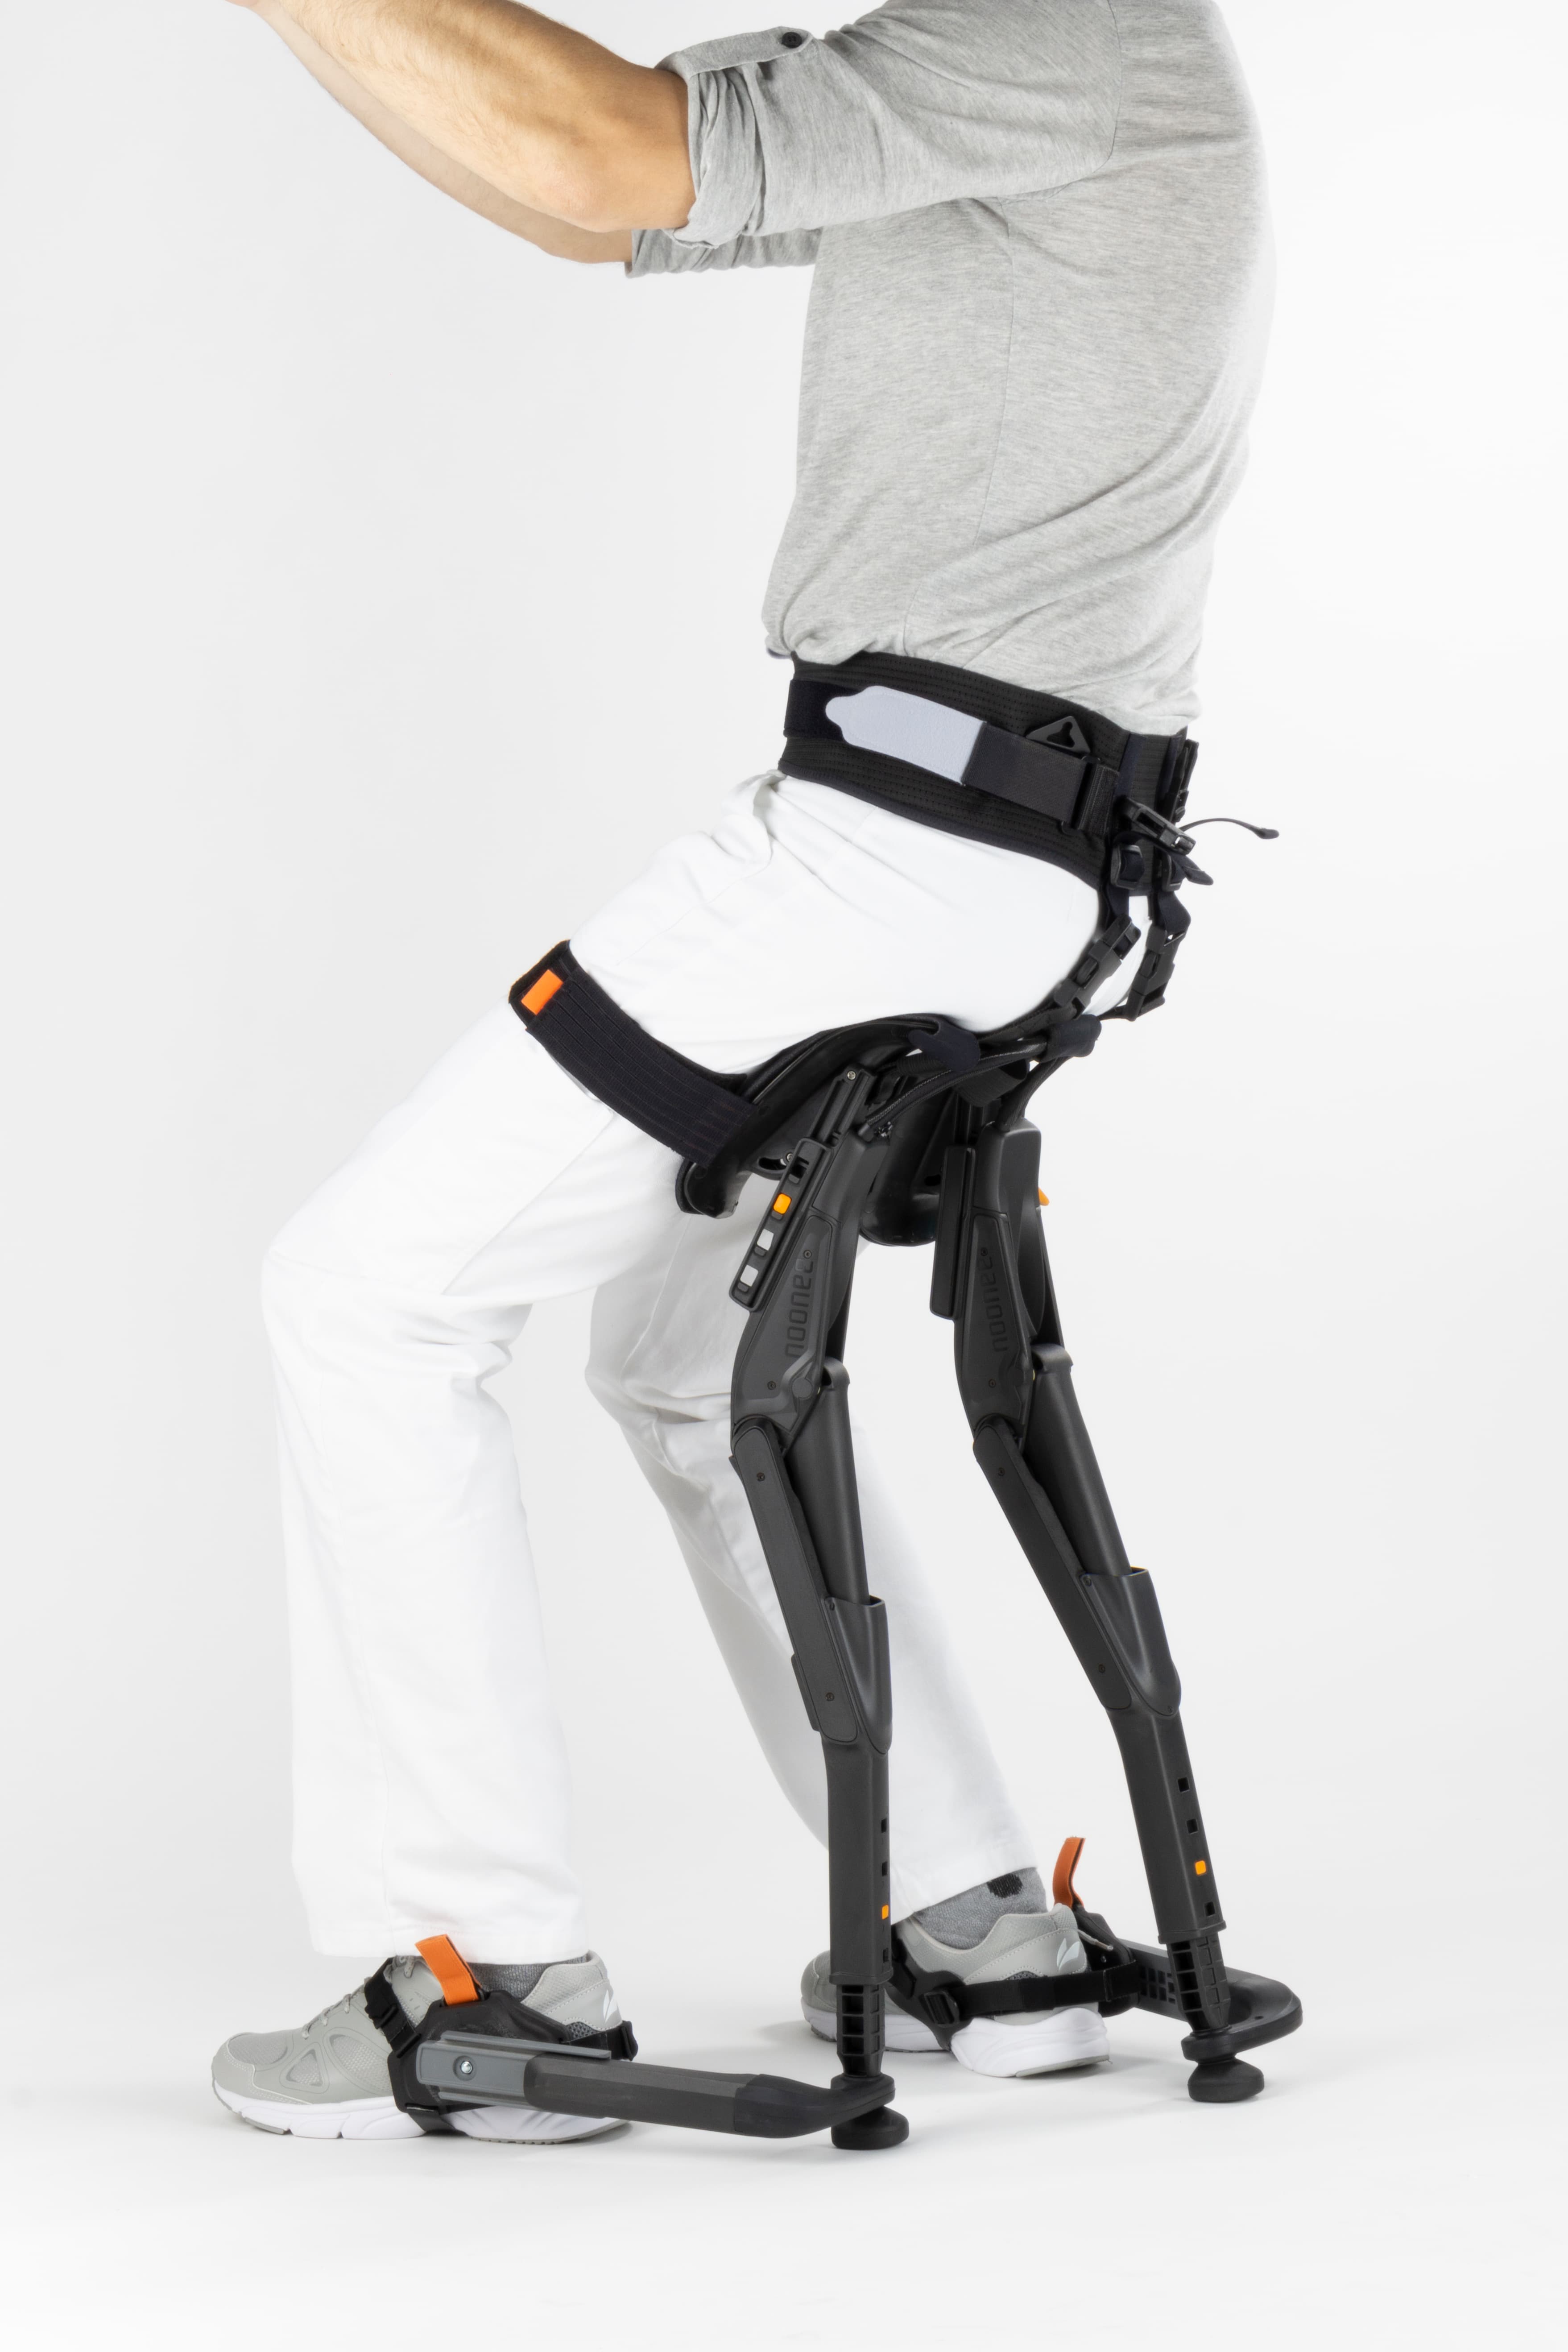 chairless chair in a sitting position